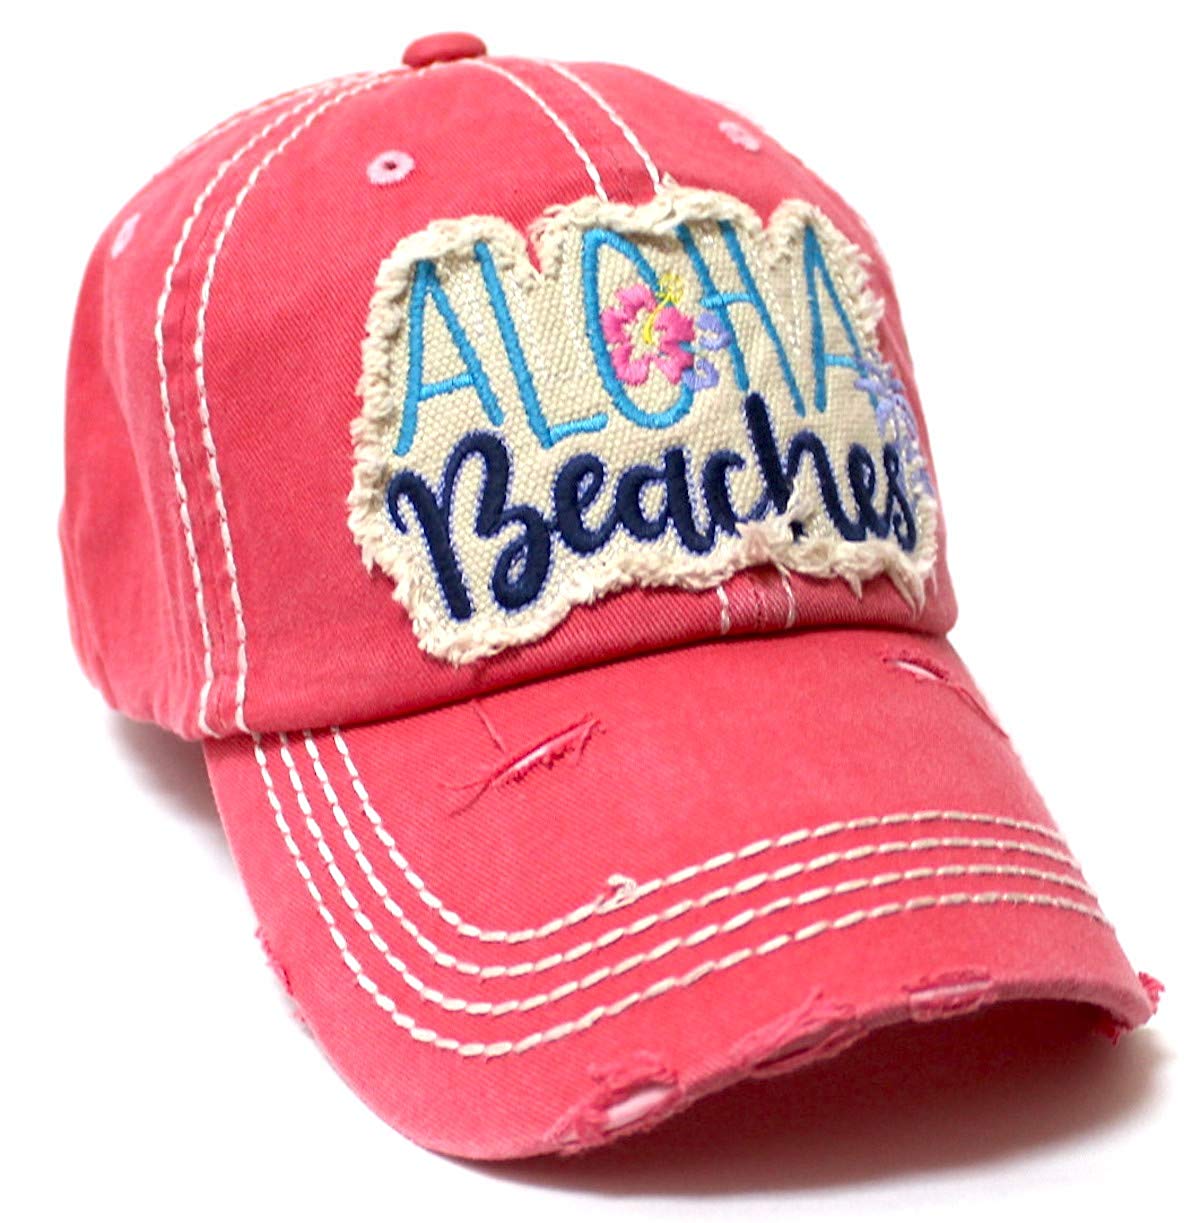 Aloha Beaches Patch Embroidery Distressed Baseball Hat, Coral Rose - Caps 'N Vintage 